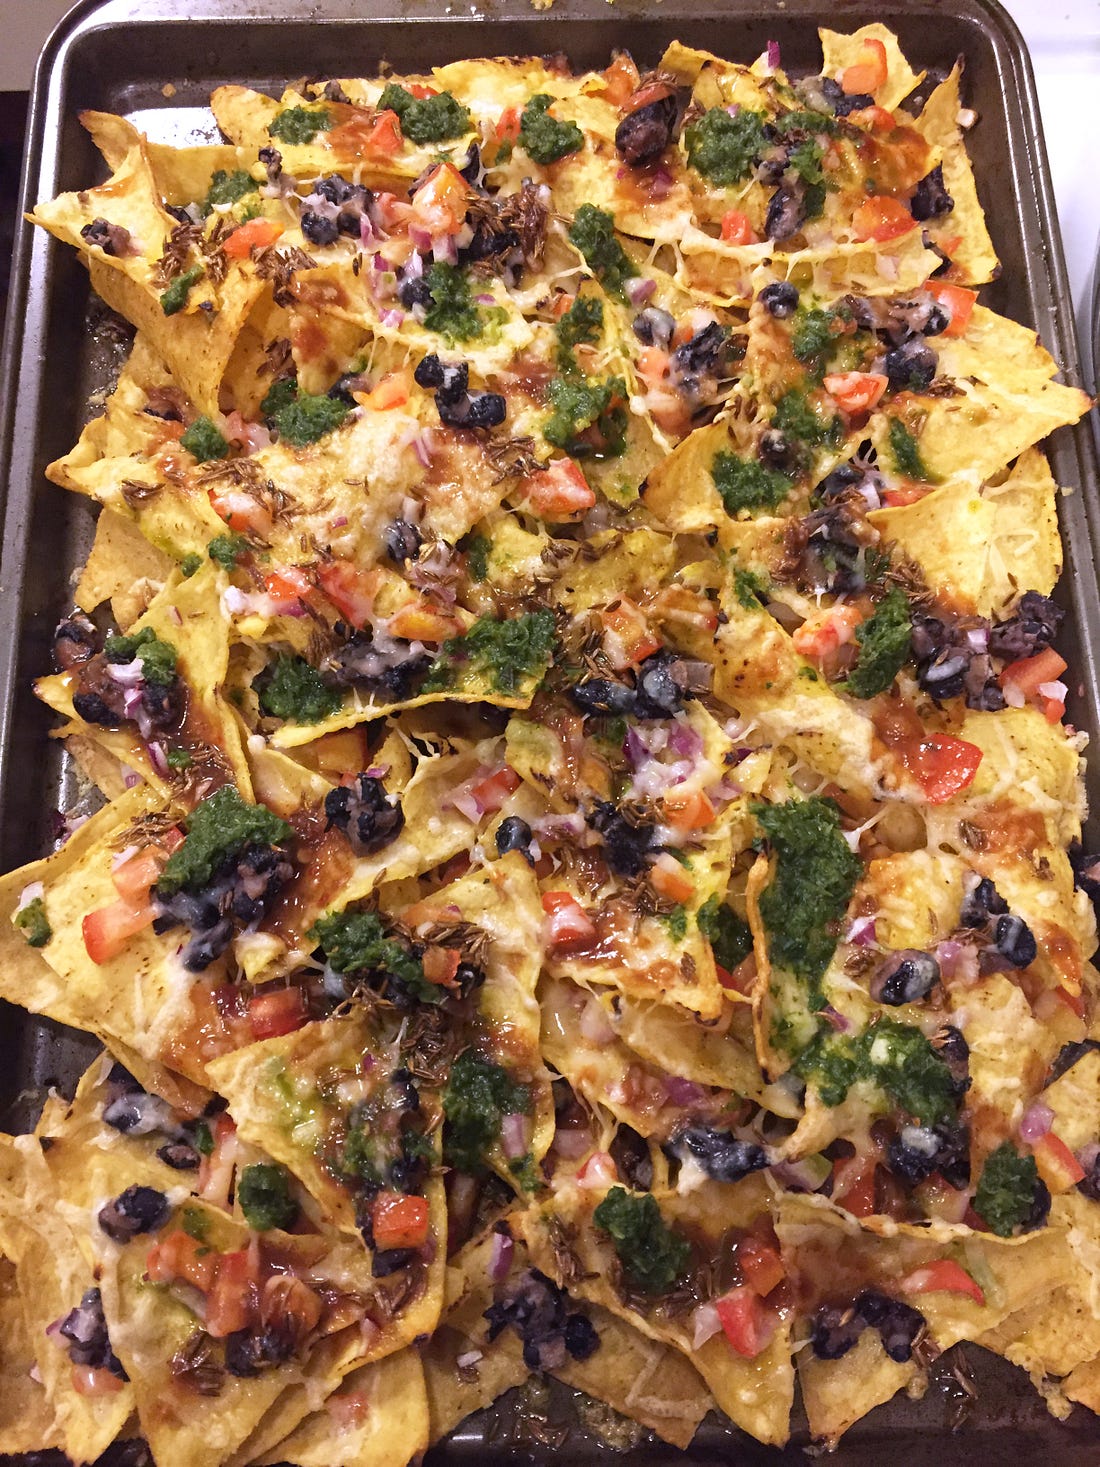 A pan of nachos with tomatoes, black beans, and red onions visible throughout. Bright green drops of the cilantro chutney spatter the top, and patches of cumin seeds can be seen amid the toppings.